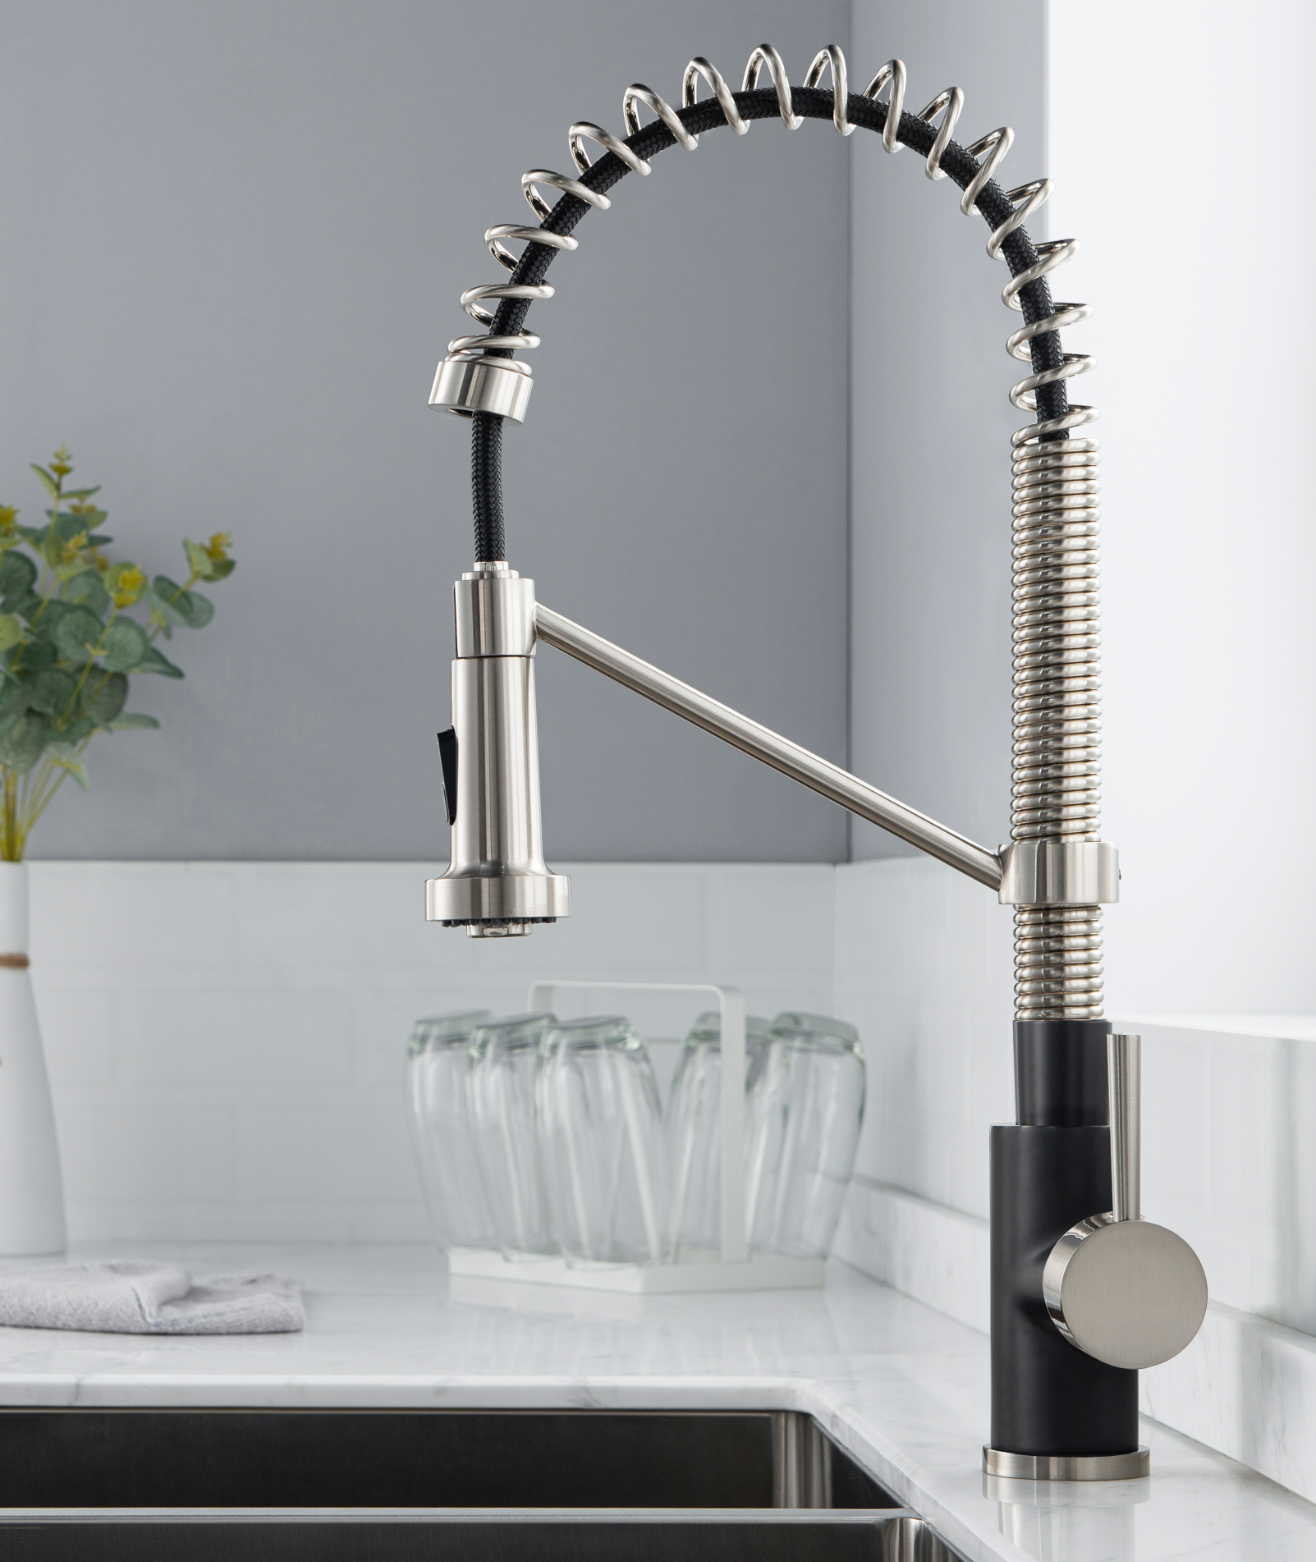  WOODBRIDGE WK010203BL Stainless Steel Single Handle Spring Coil Pre-Rinse Kitchen Faucet with Pull Down Sprayer, Matte Black Finish_9461